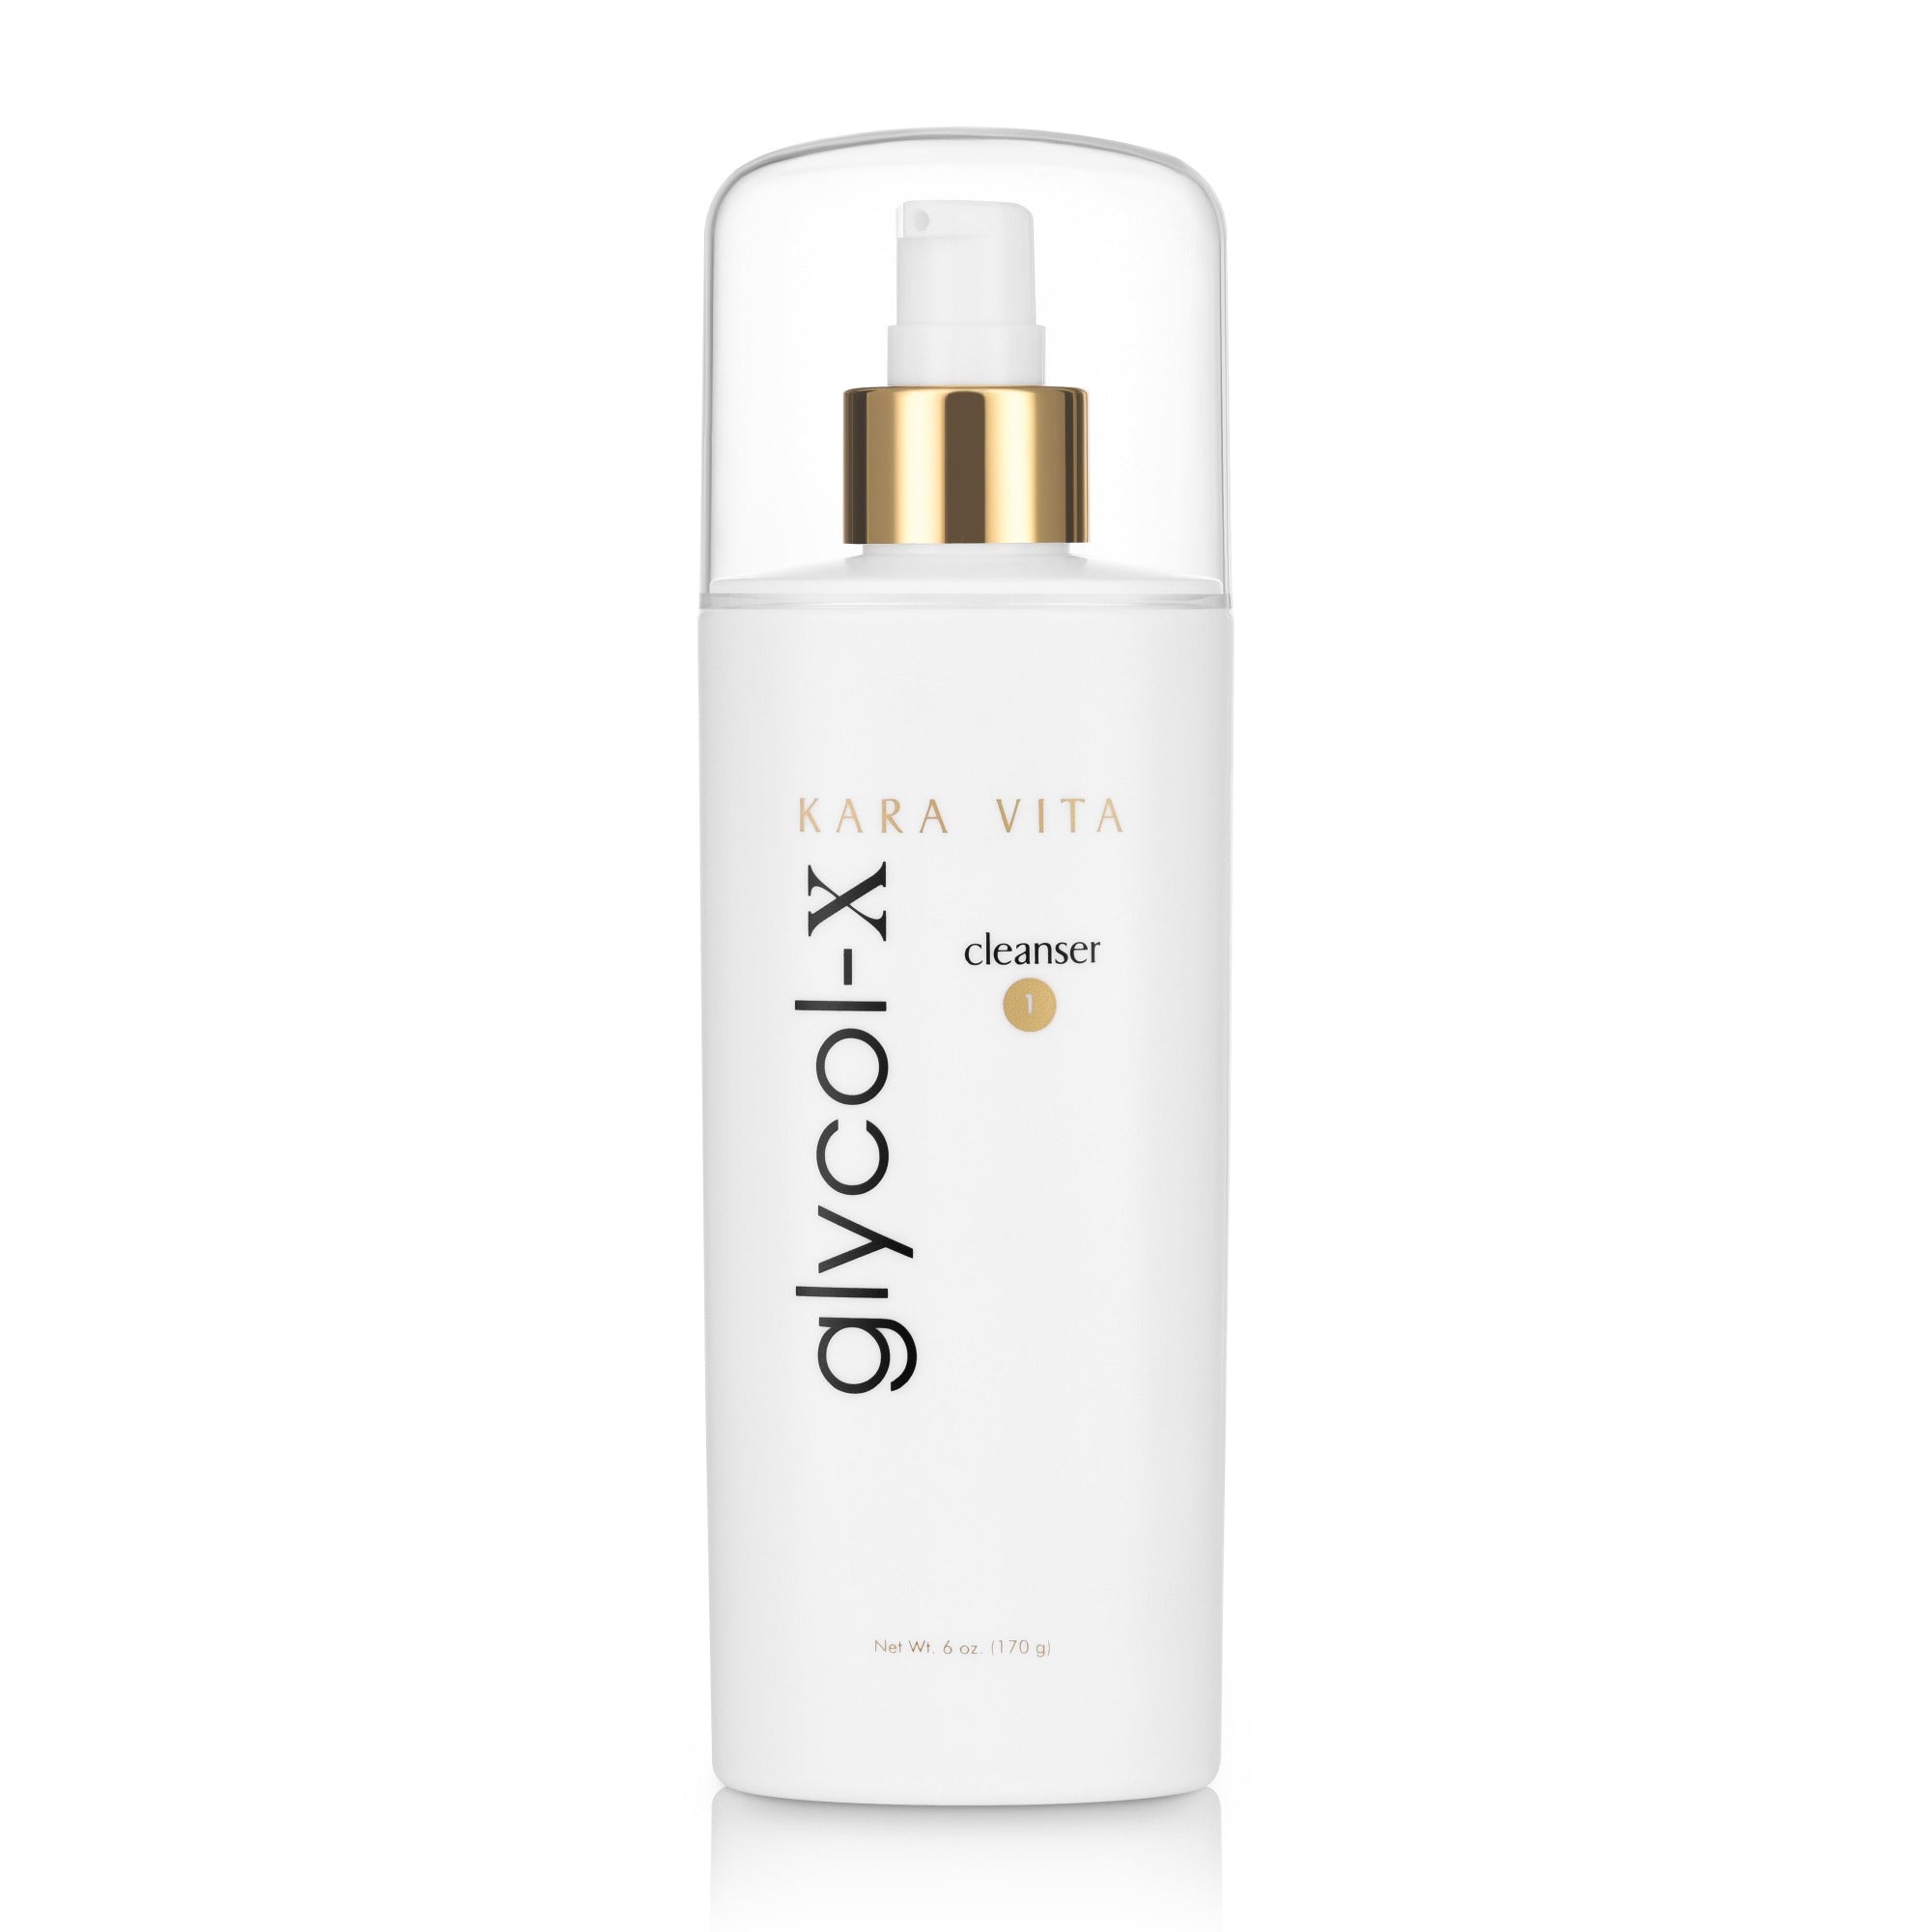 glycolic cleanser